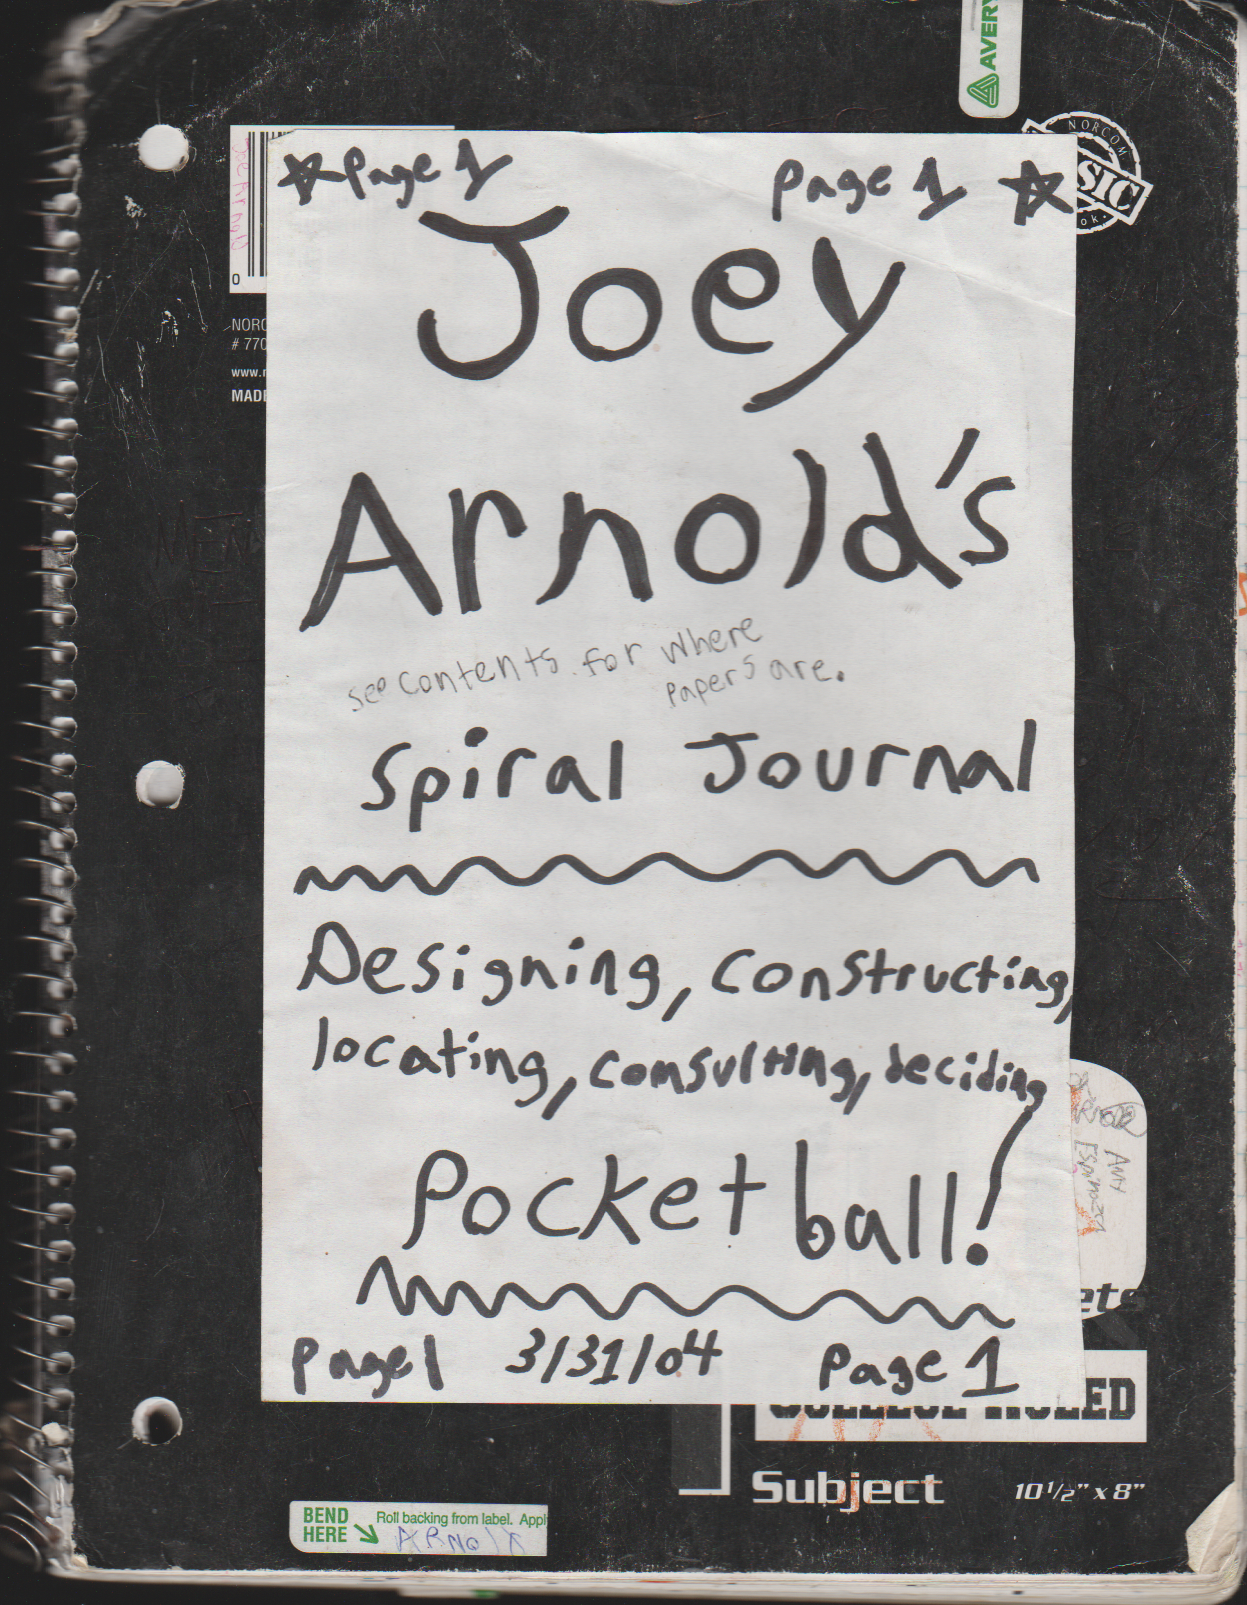 2004-01-29 - Thursday - Carpetball FGHS Senior Project Journal, Joey Arnold, Part 01, Notebook-1.png